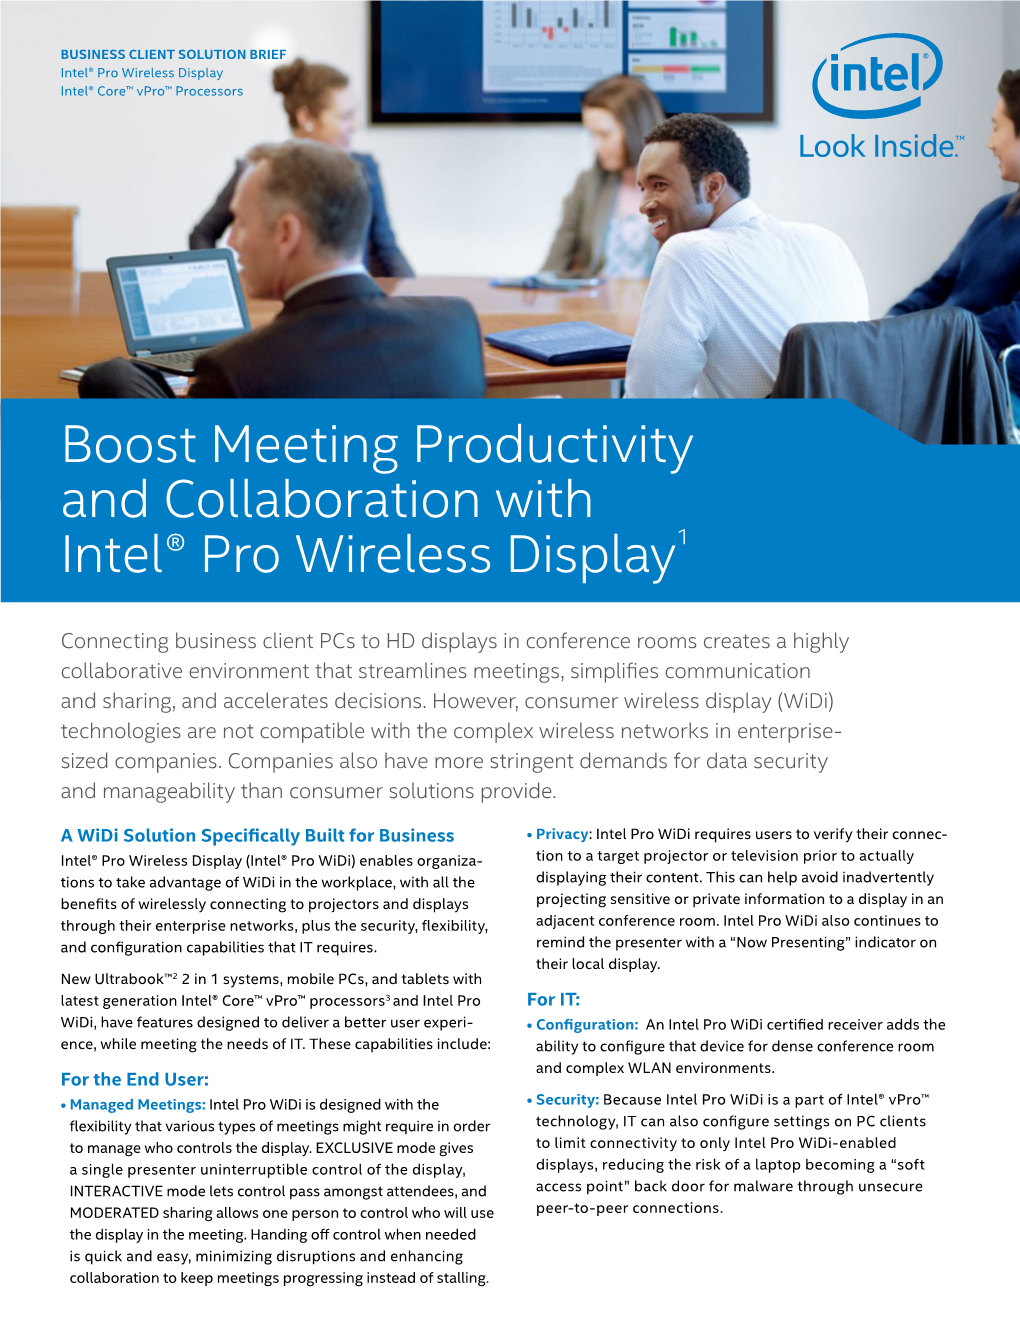 Boost Meeting Productivity and Collaboration with Intel® Pro Wireless Display1